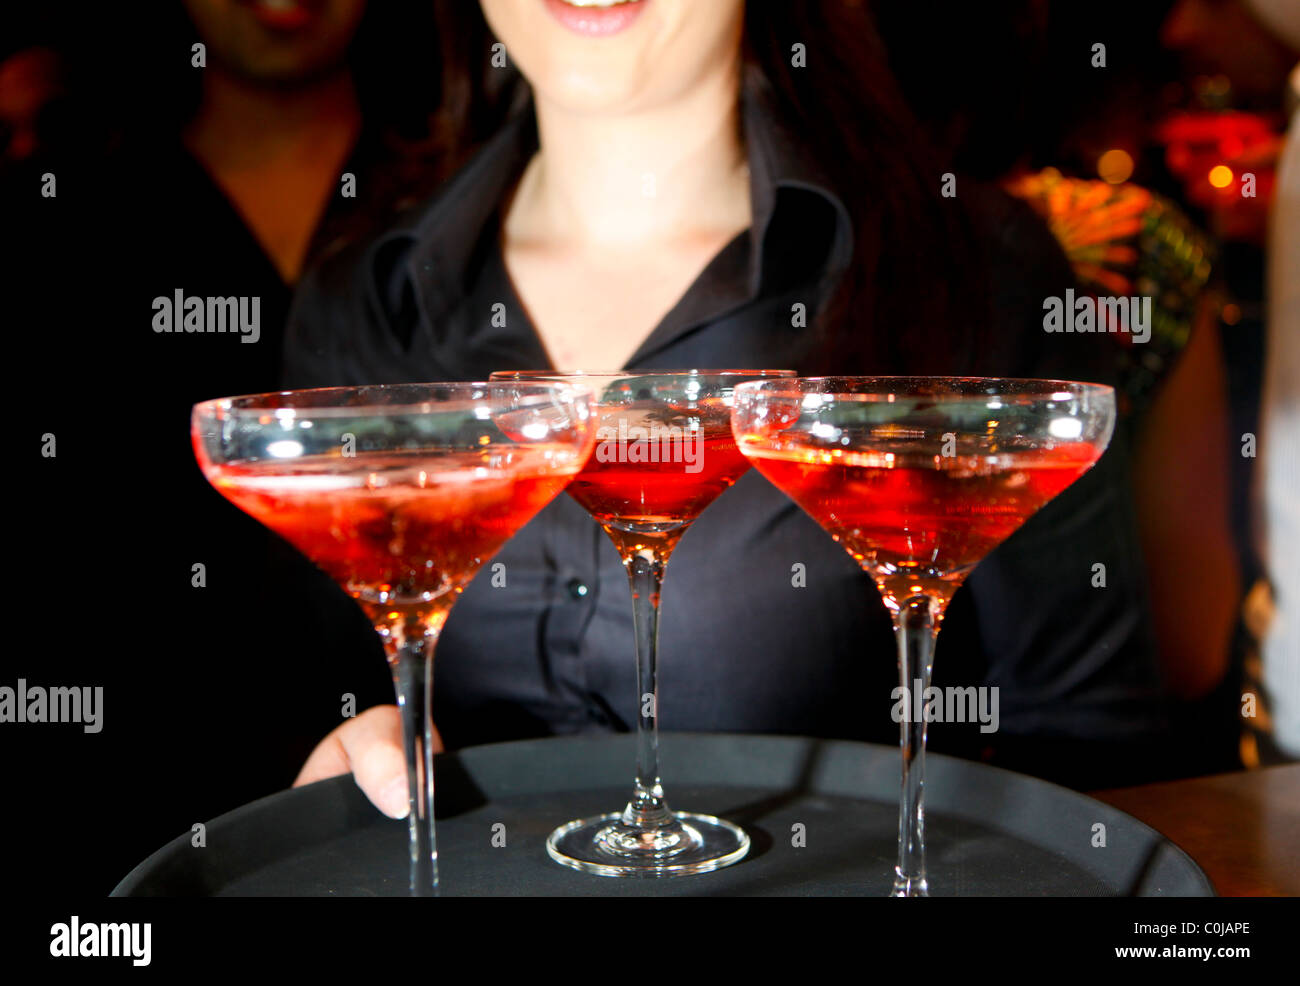 A waitress holding a tray of pink champagne glasses in a bar Stock Photo